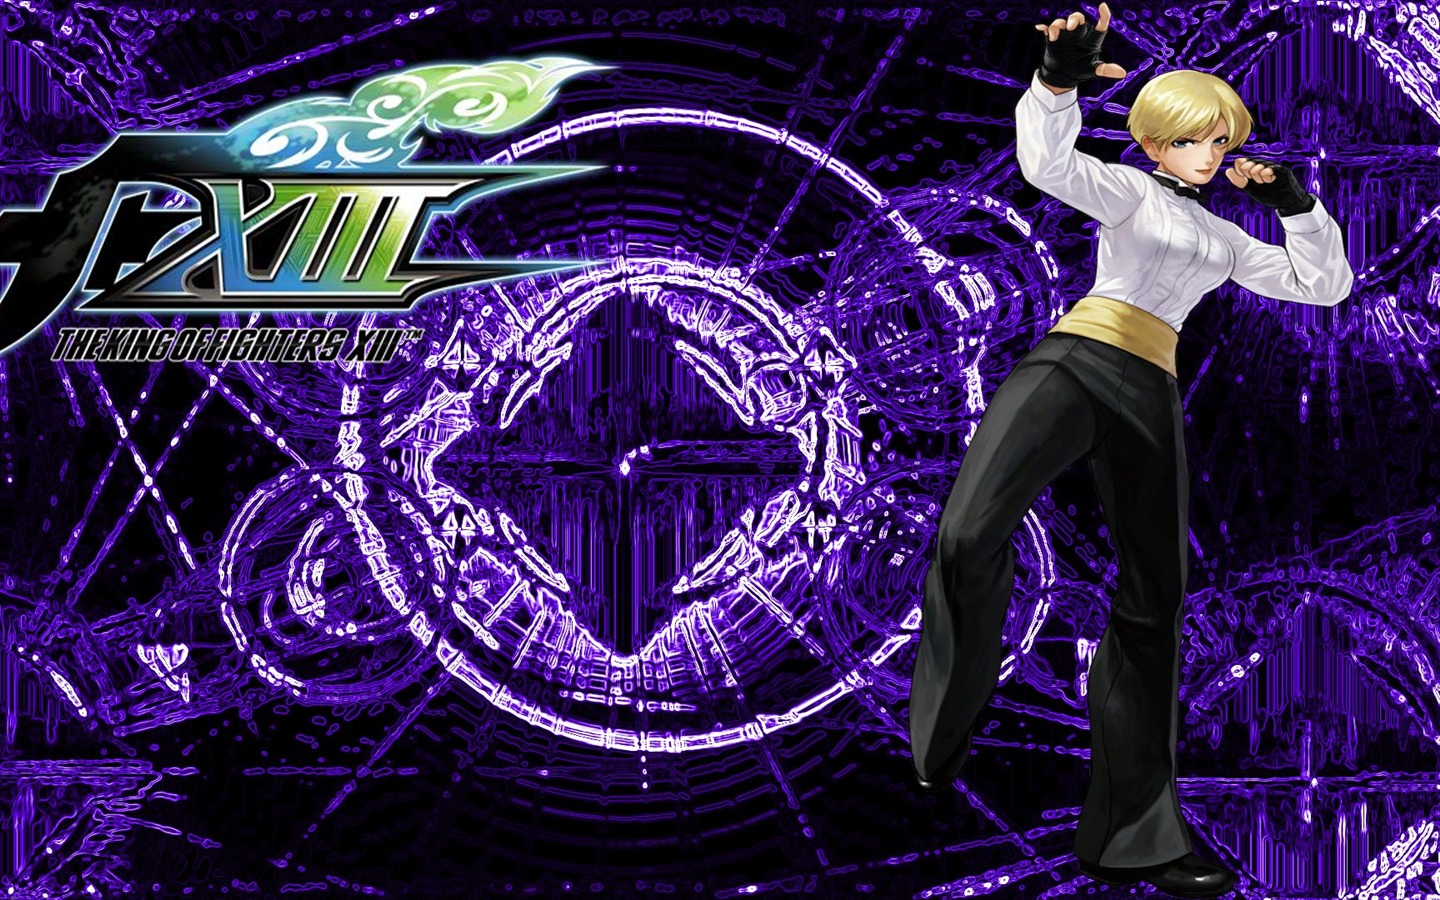 Le roi de wallpapers Fighters XIII #9 - 1440x900